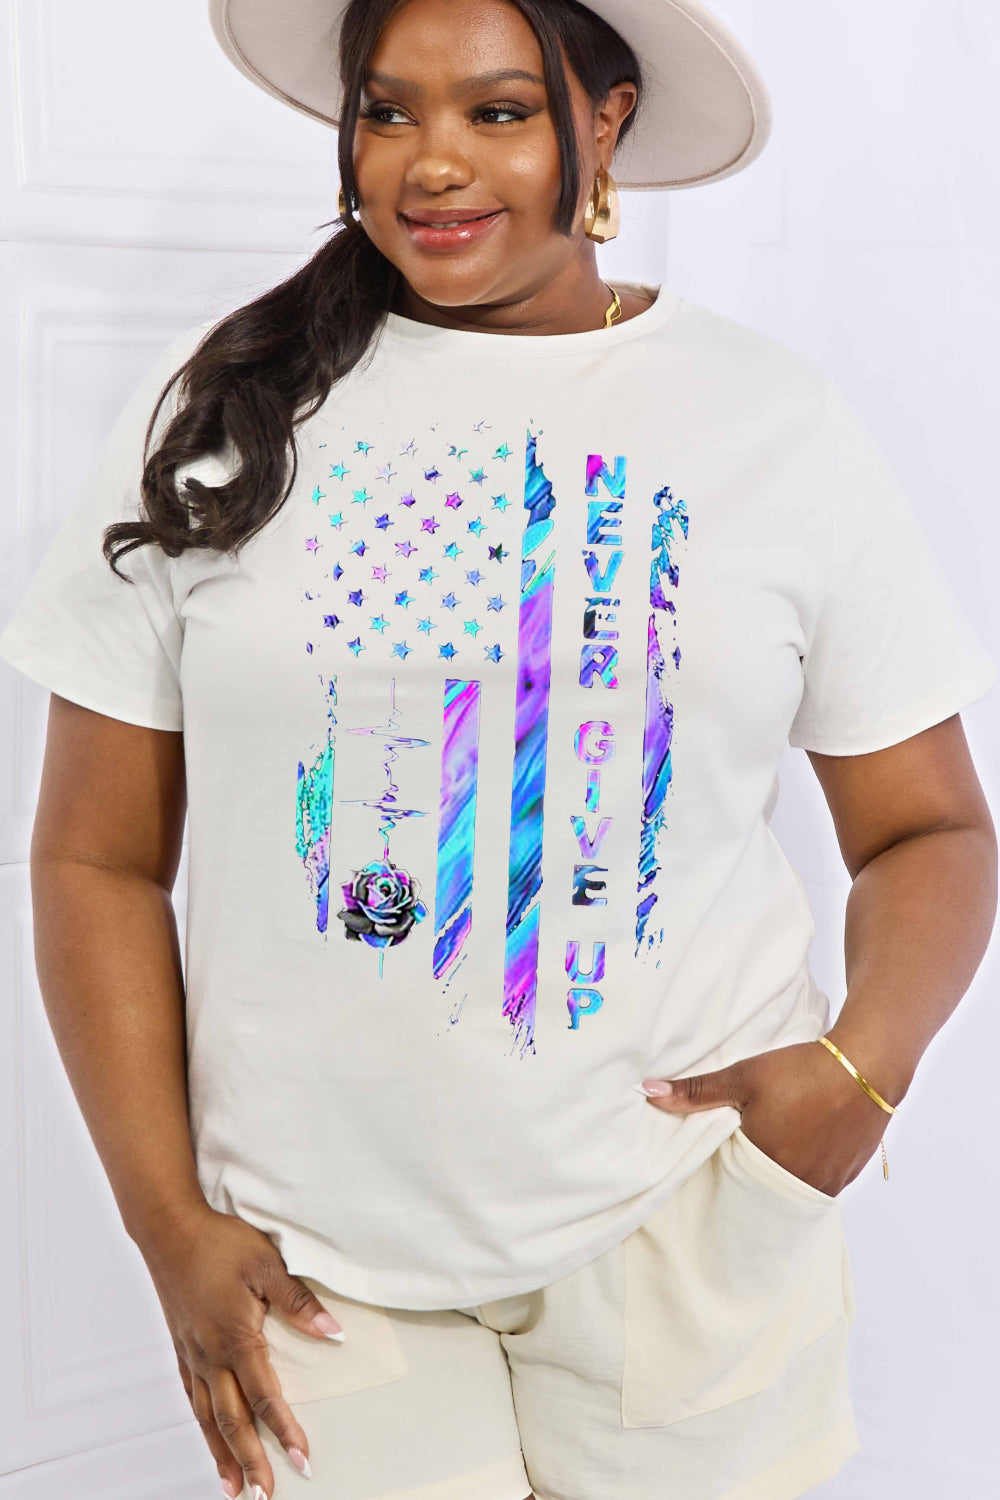 NEVER GIVE UP Graphic Cotton Tee - T-Shirts - Shirts & Tops - 20 - 2024